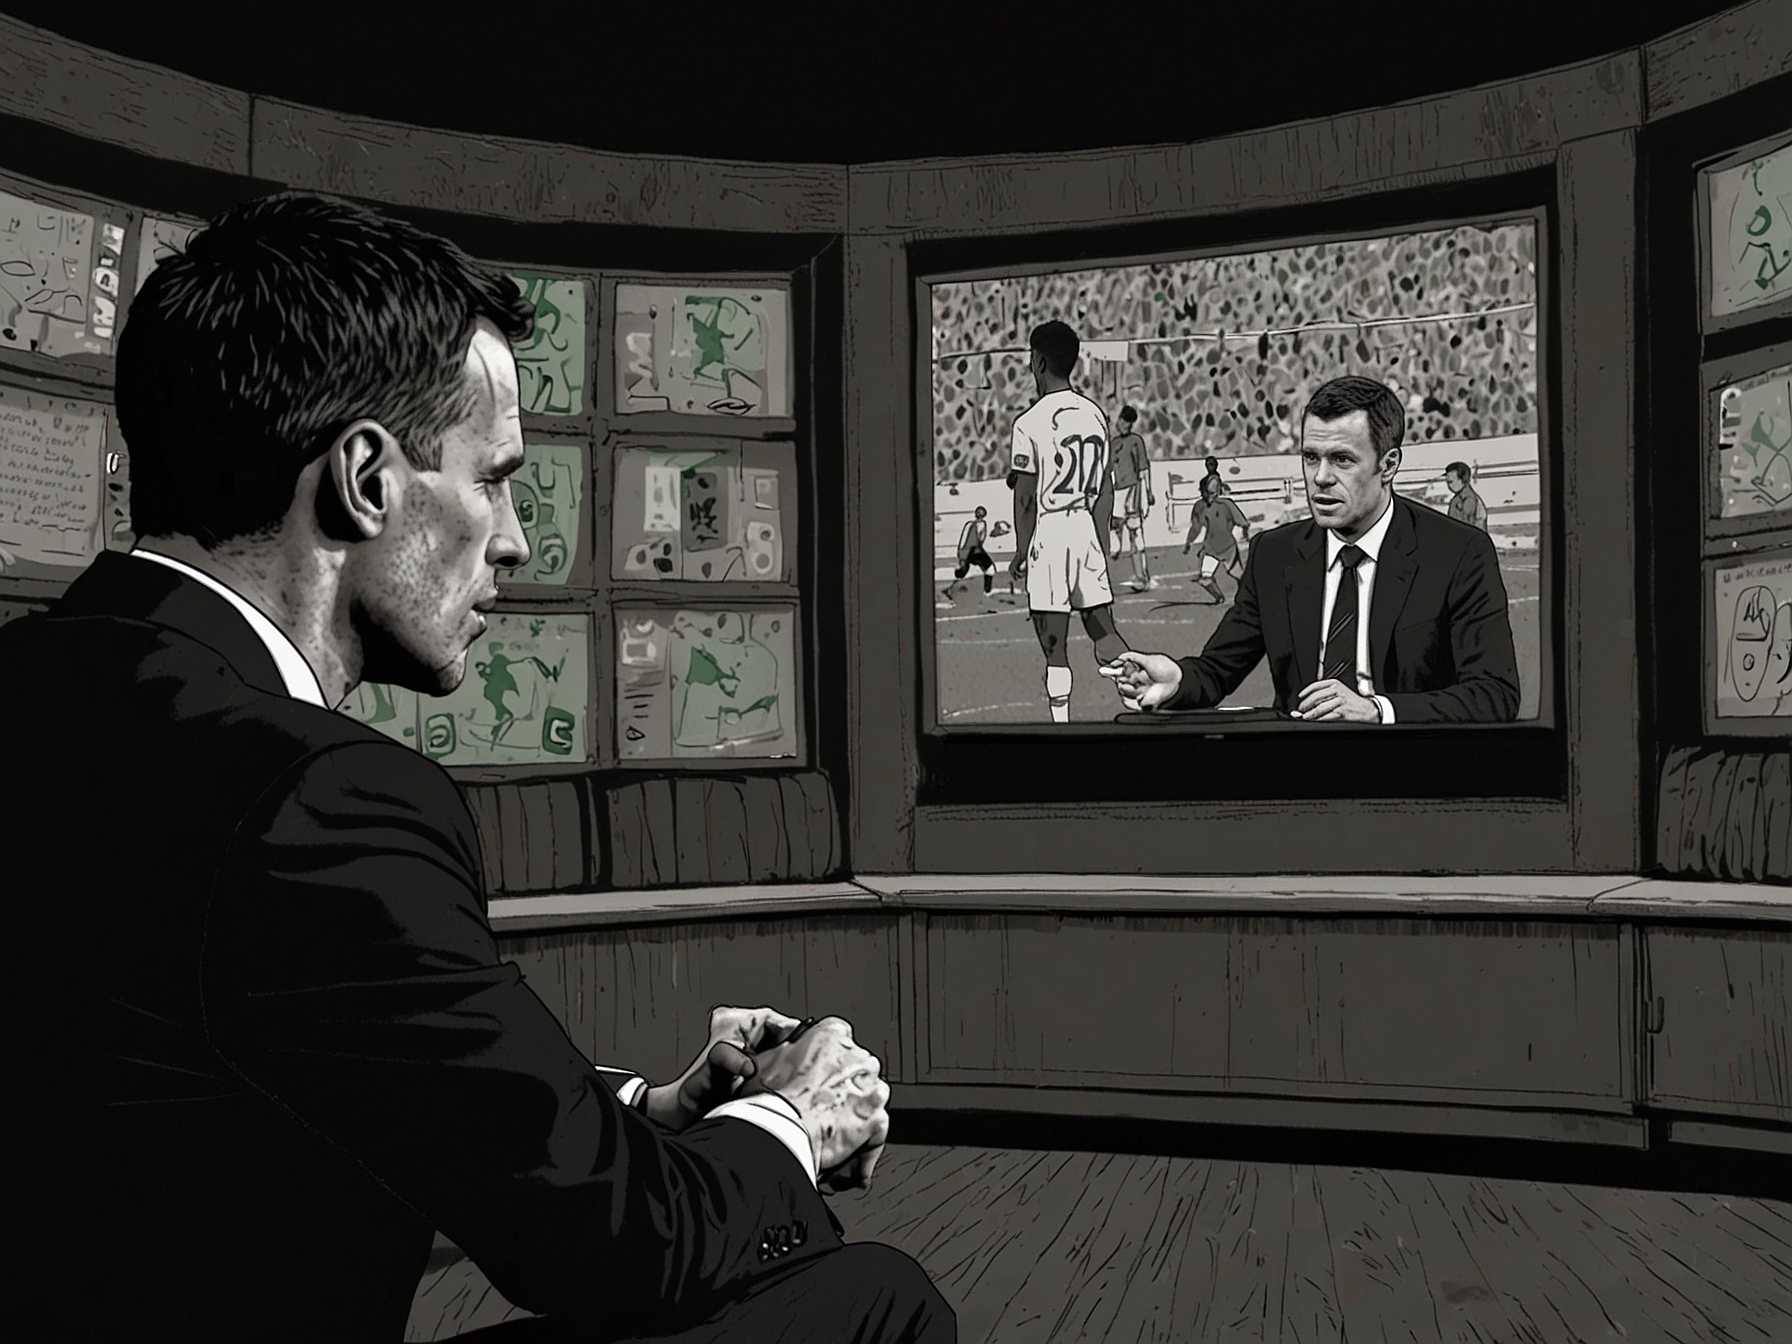 Jamie Carragher engaging in an in-depth analysis on television, emphasizing that England's big-name stars need to deliver more consistently on the international stage.